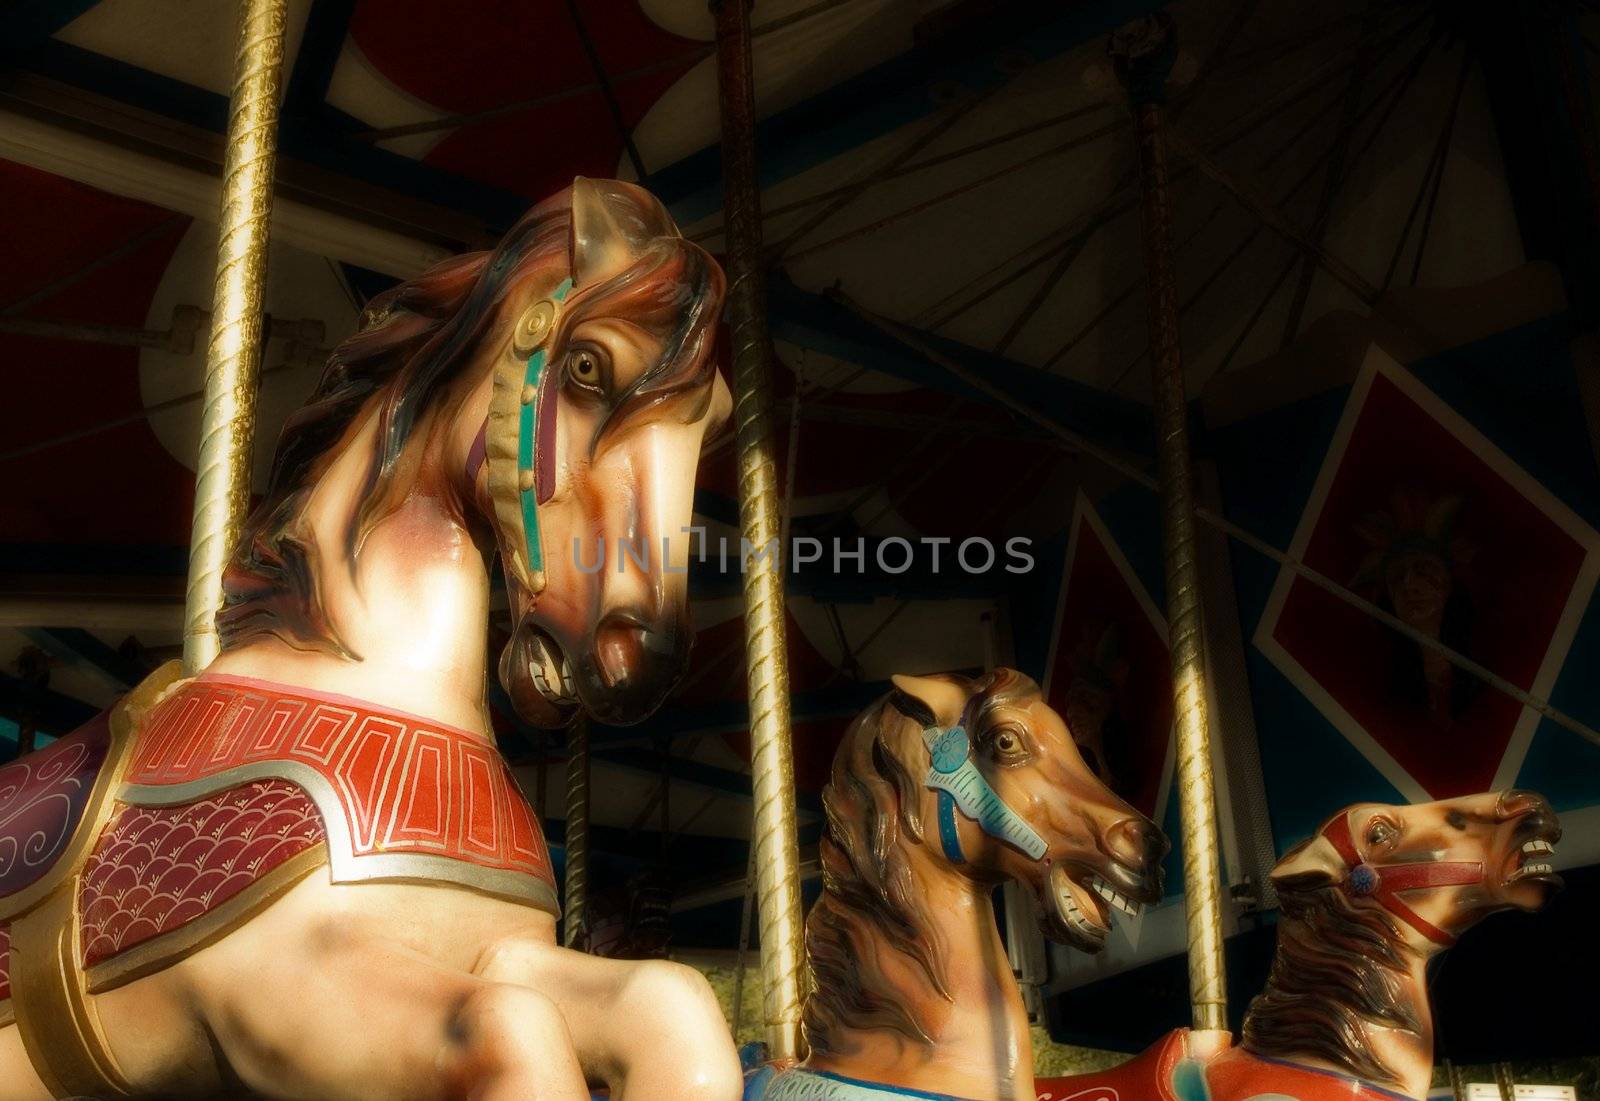 Carousel Horses with a Vintage Feel by griffre